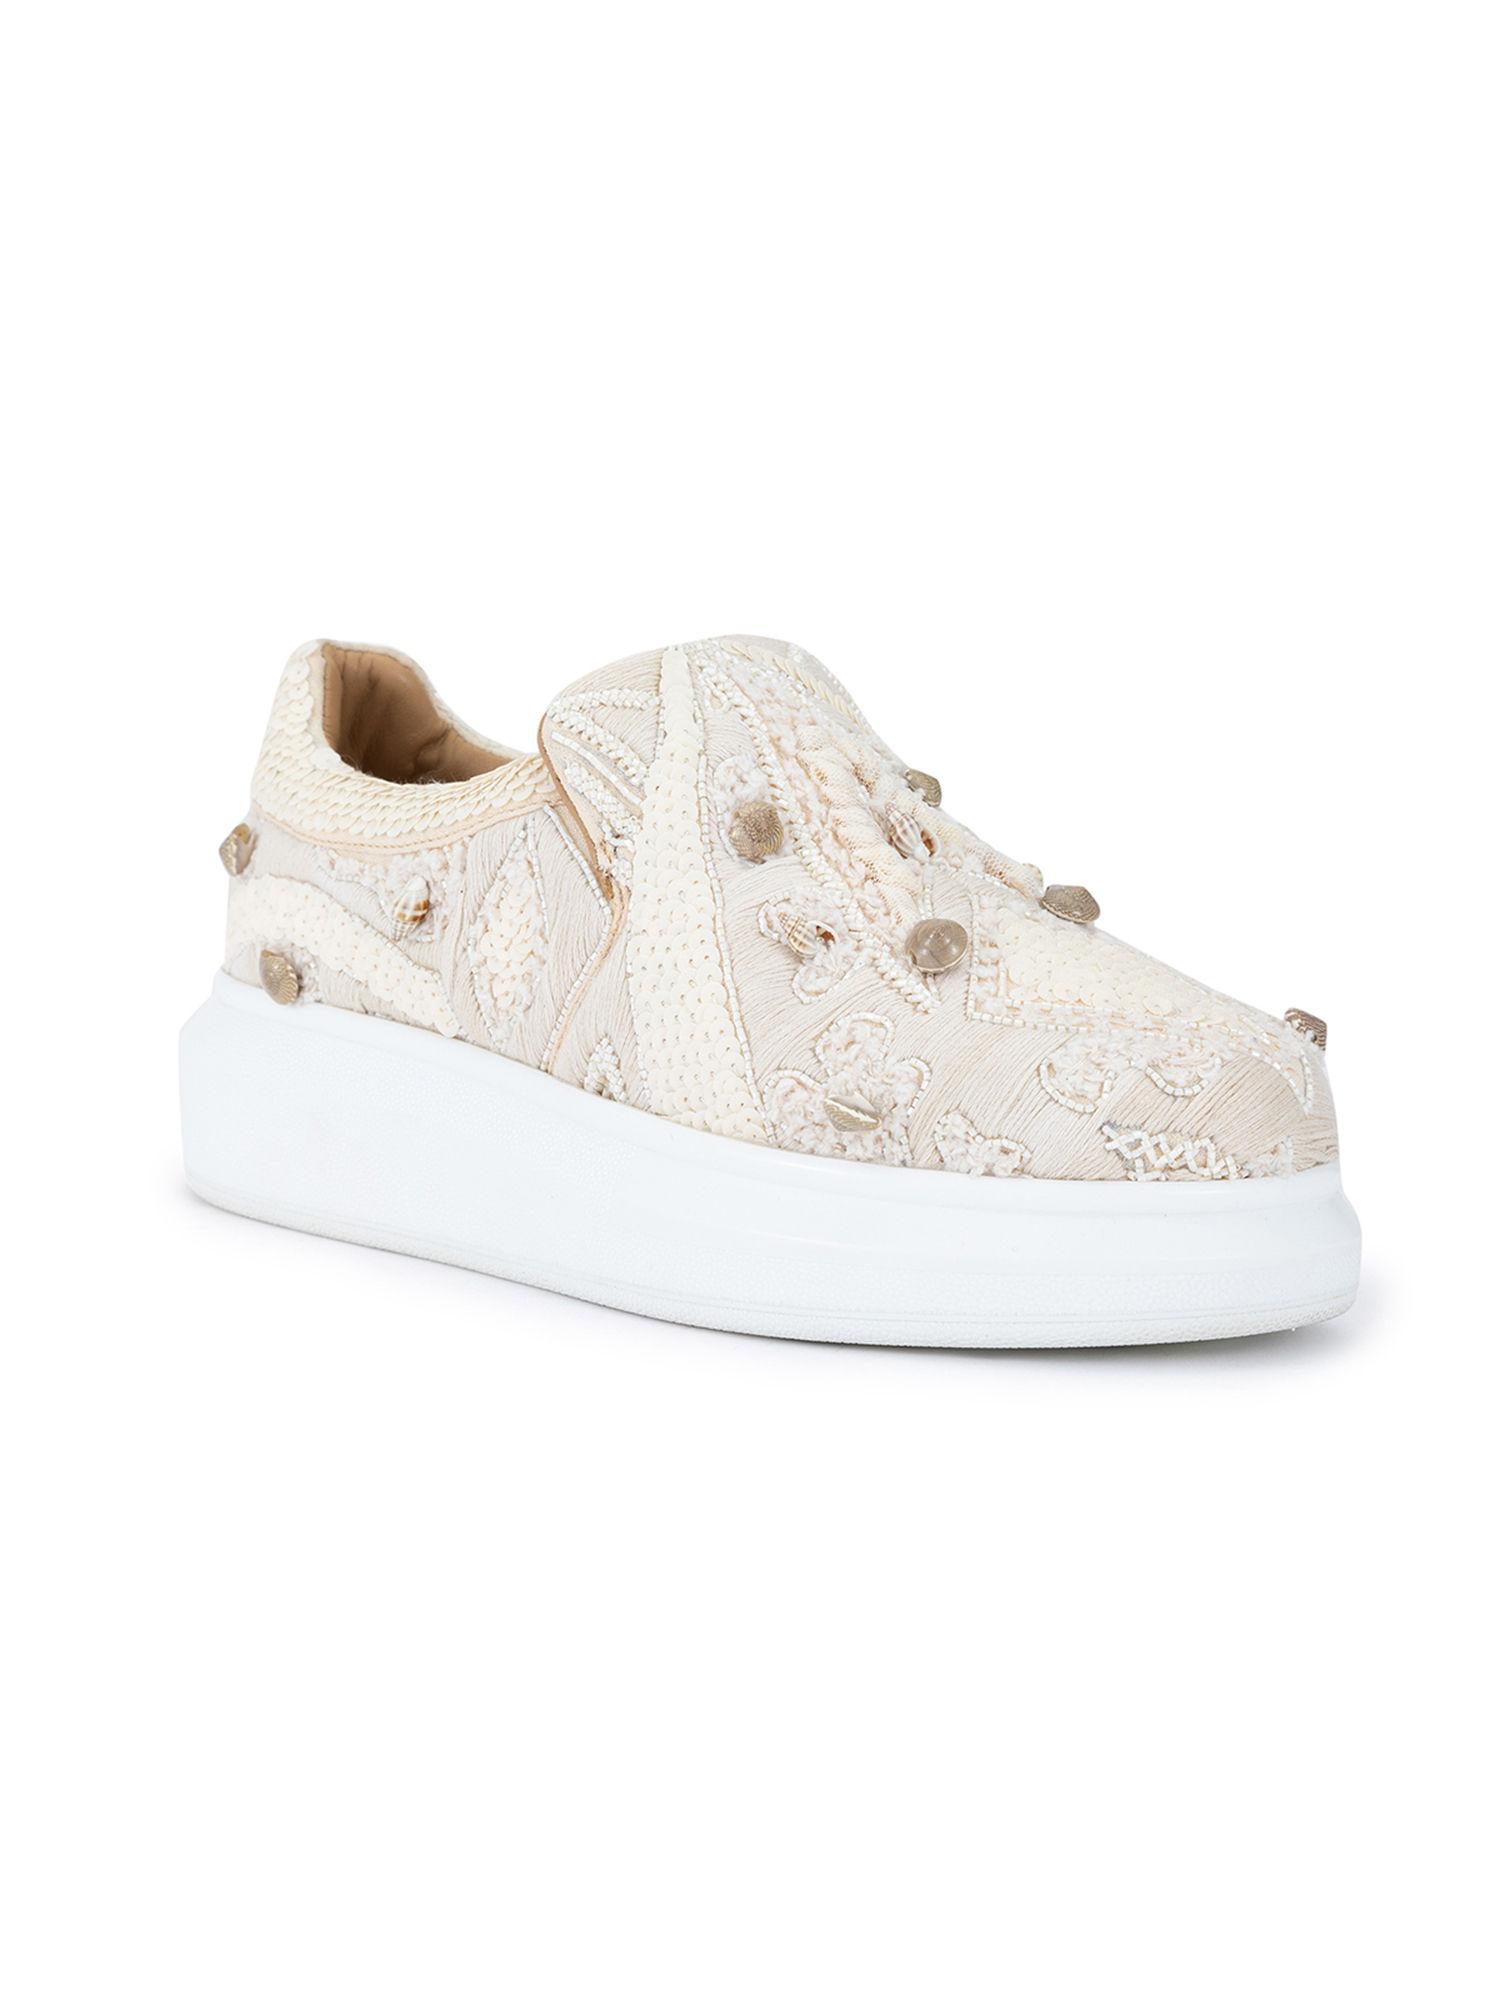 paradise classic beige womens sneakers